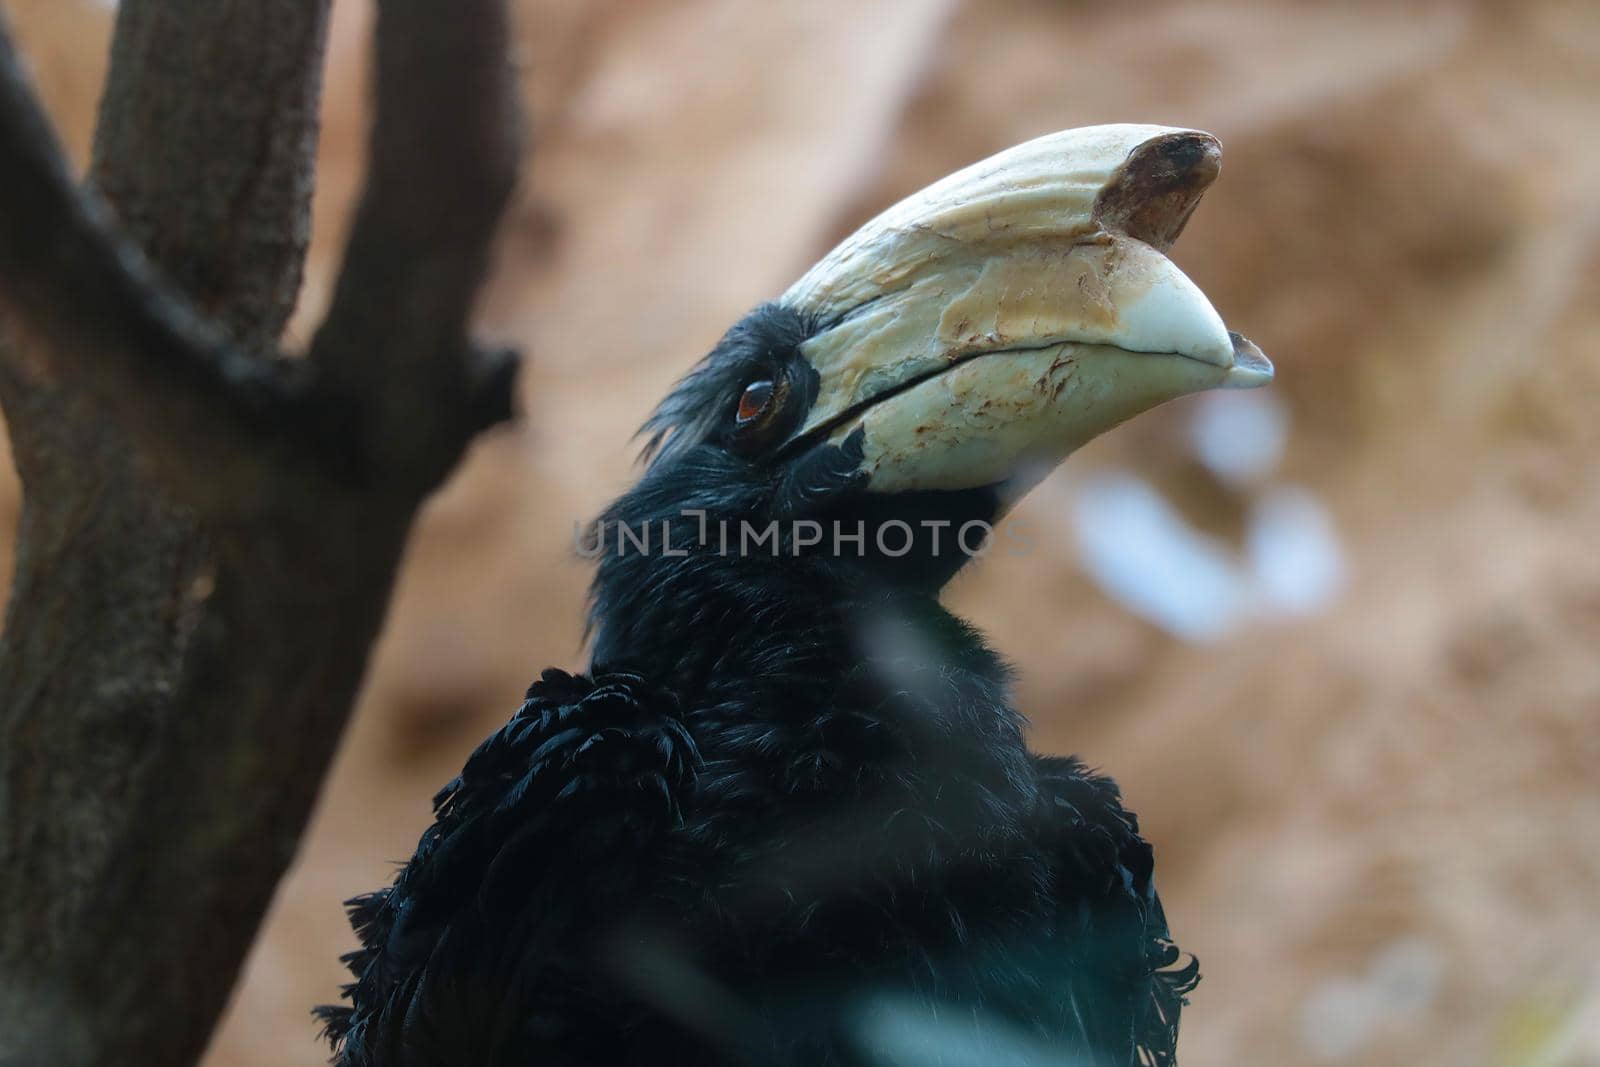 Hornbills are a family of birds from the order of the same name. The bird sits on a tree branch. by kip02kas